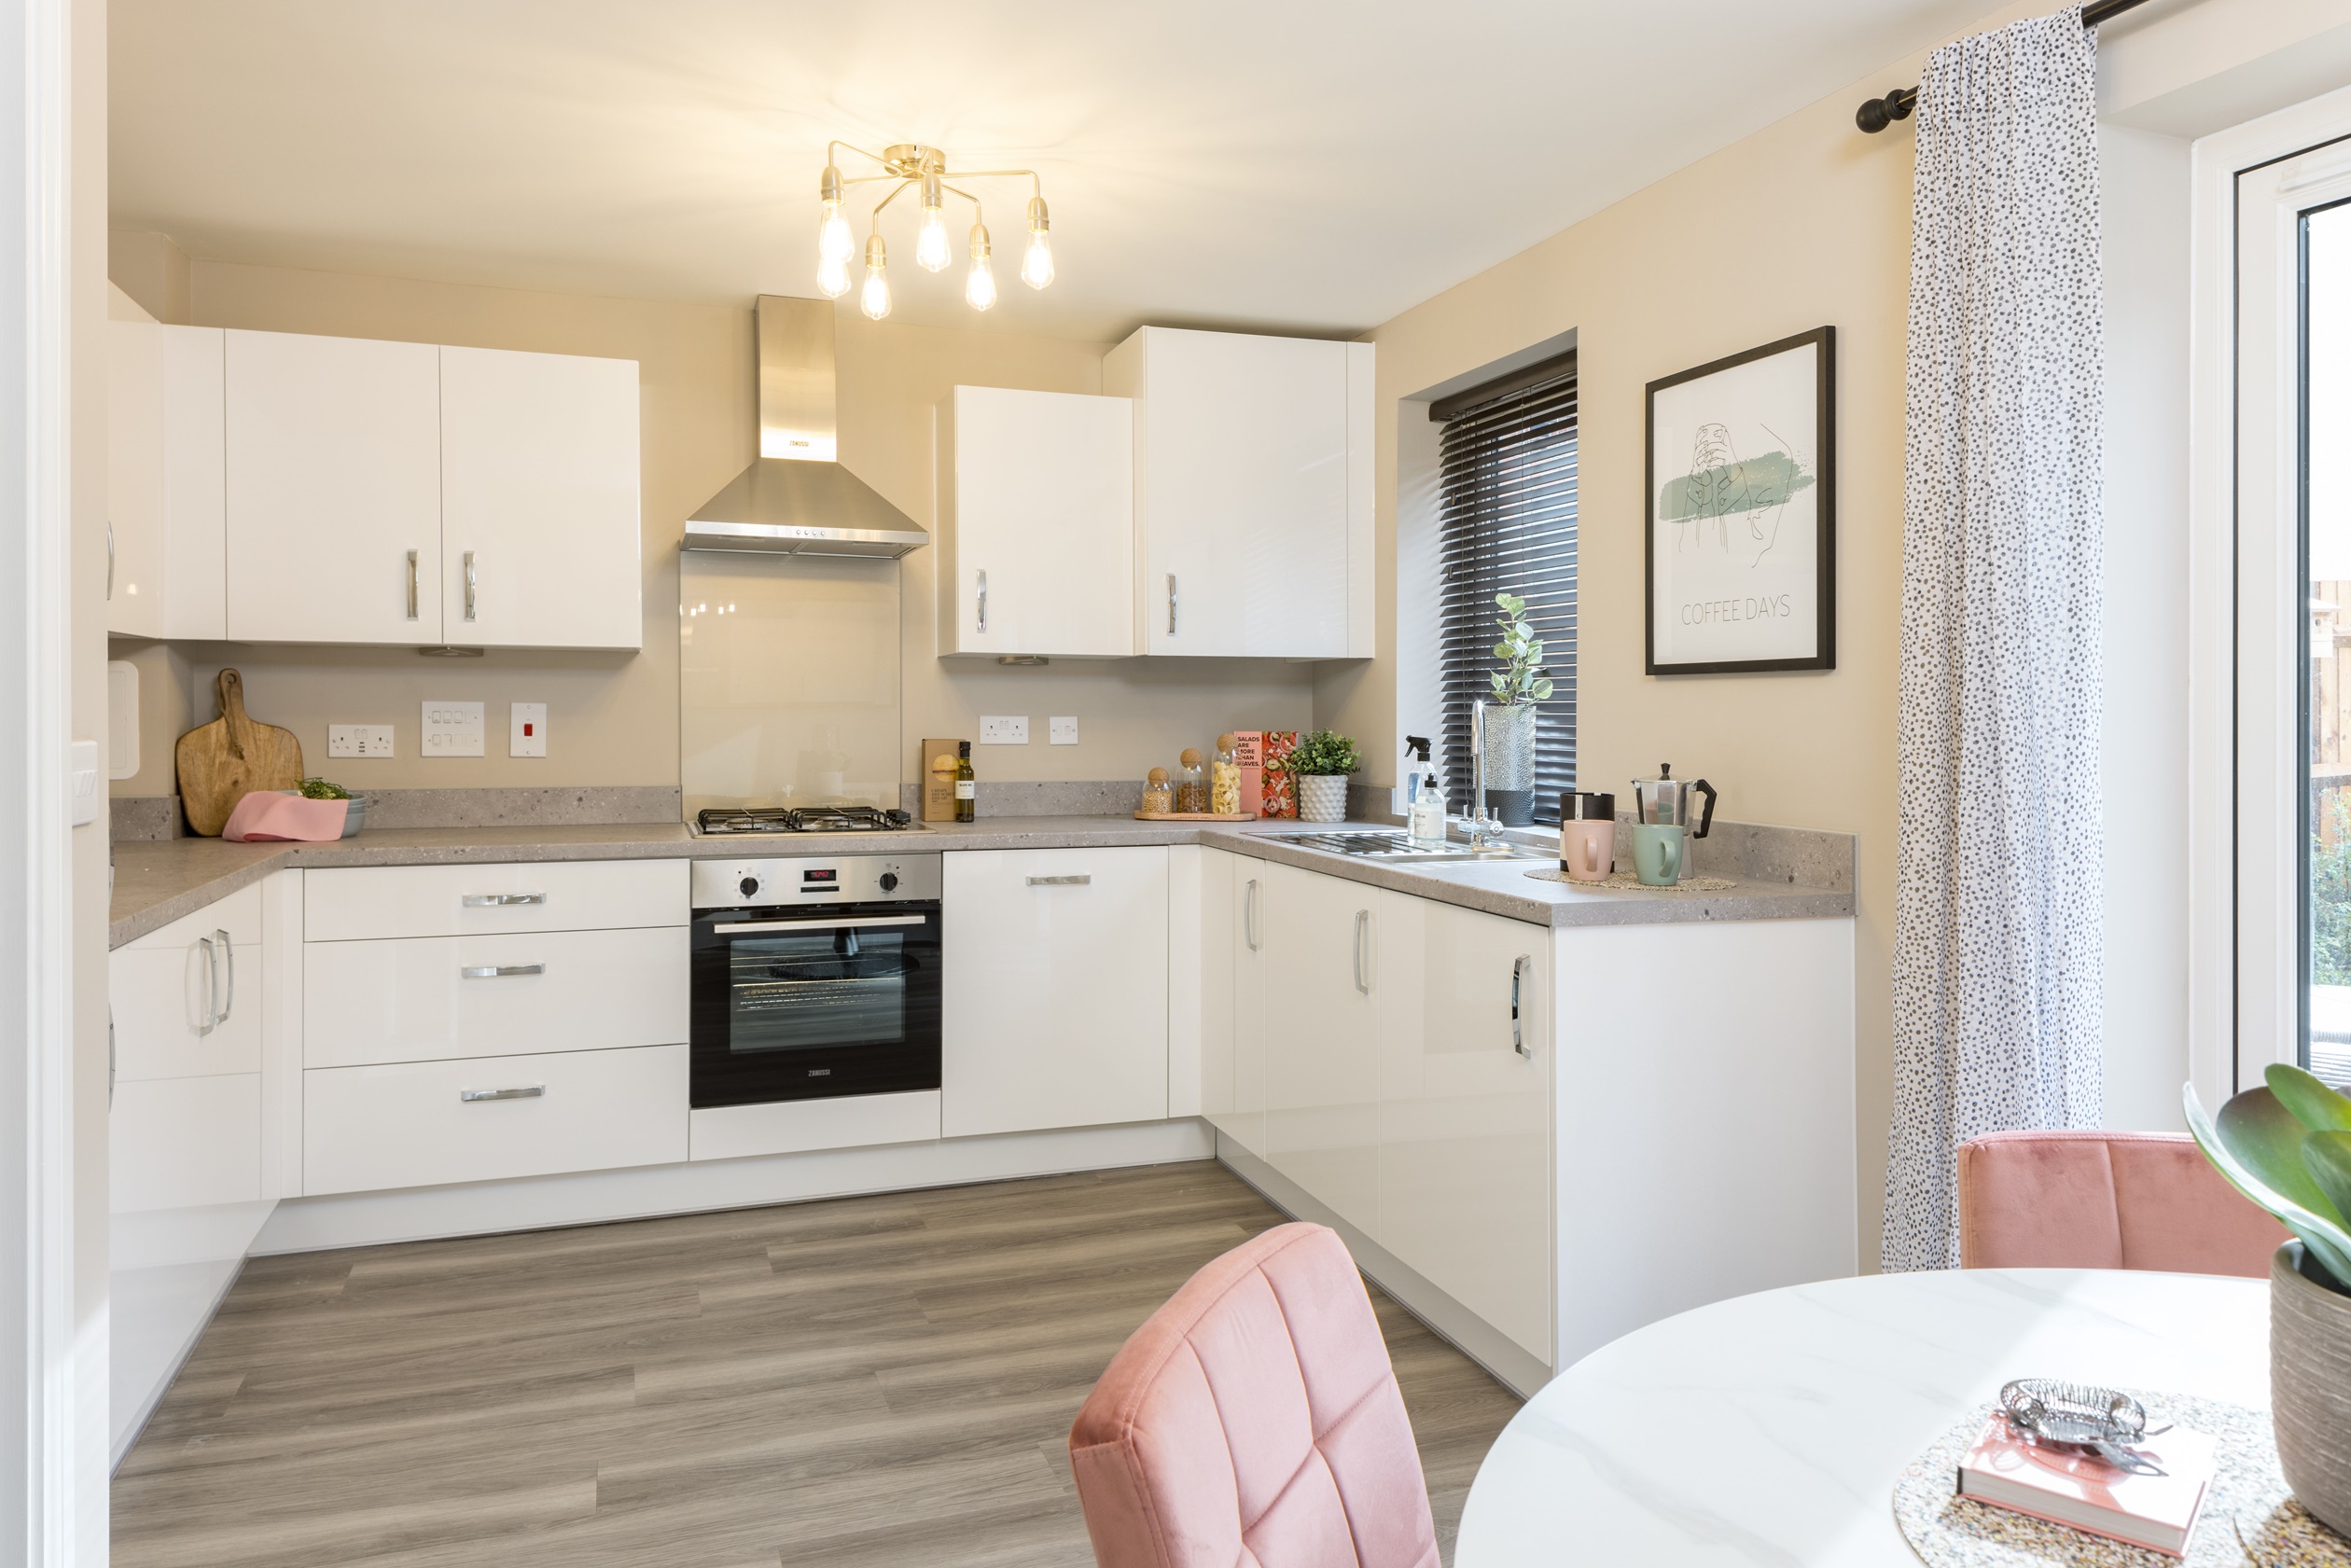 Property 3 of 9. Archford Linmere Kitchen Diner